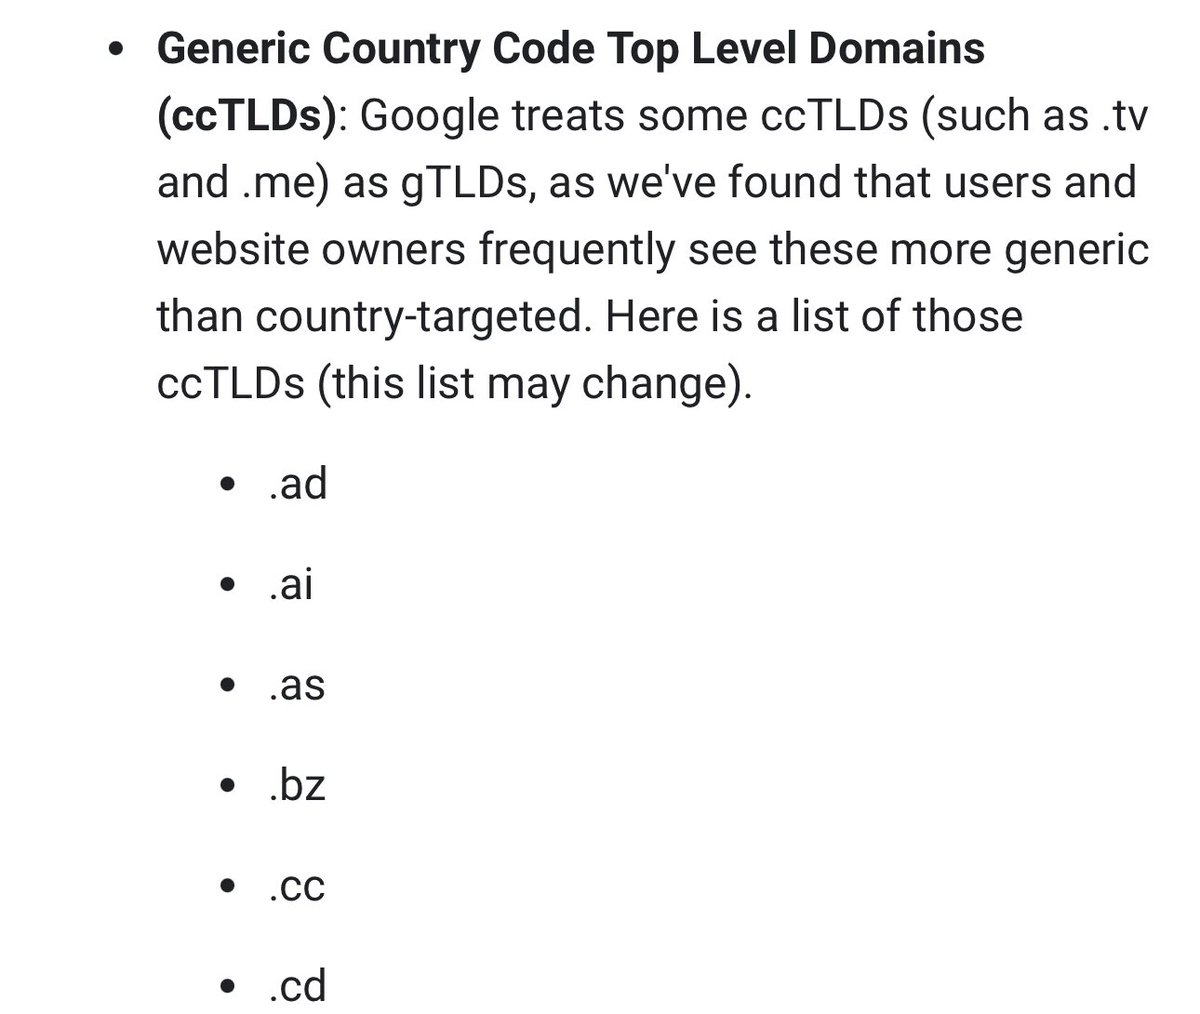 FYI: .ai domains are treated as gTLDs and not geolocated 👇

developers.google.com/search/docs/sp…

/ht @methode